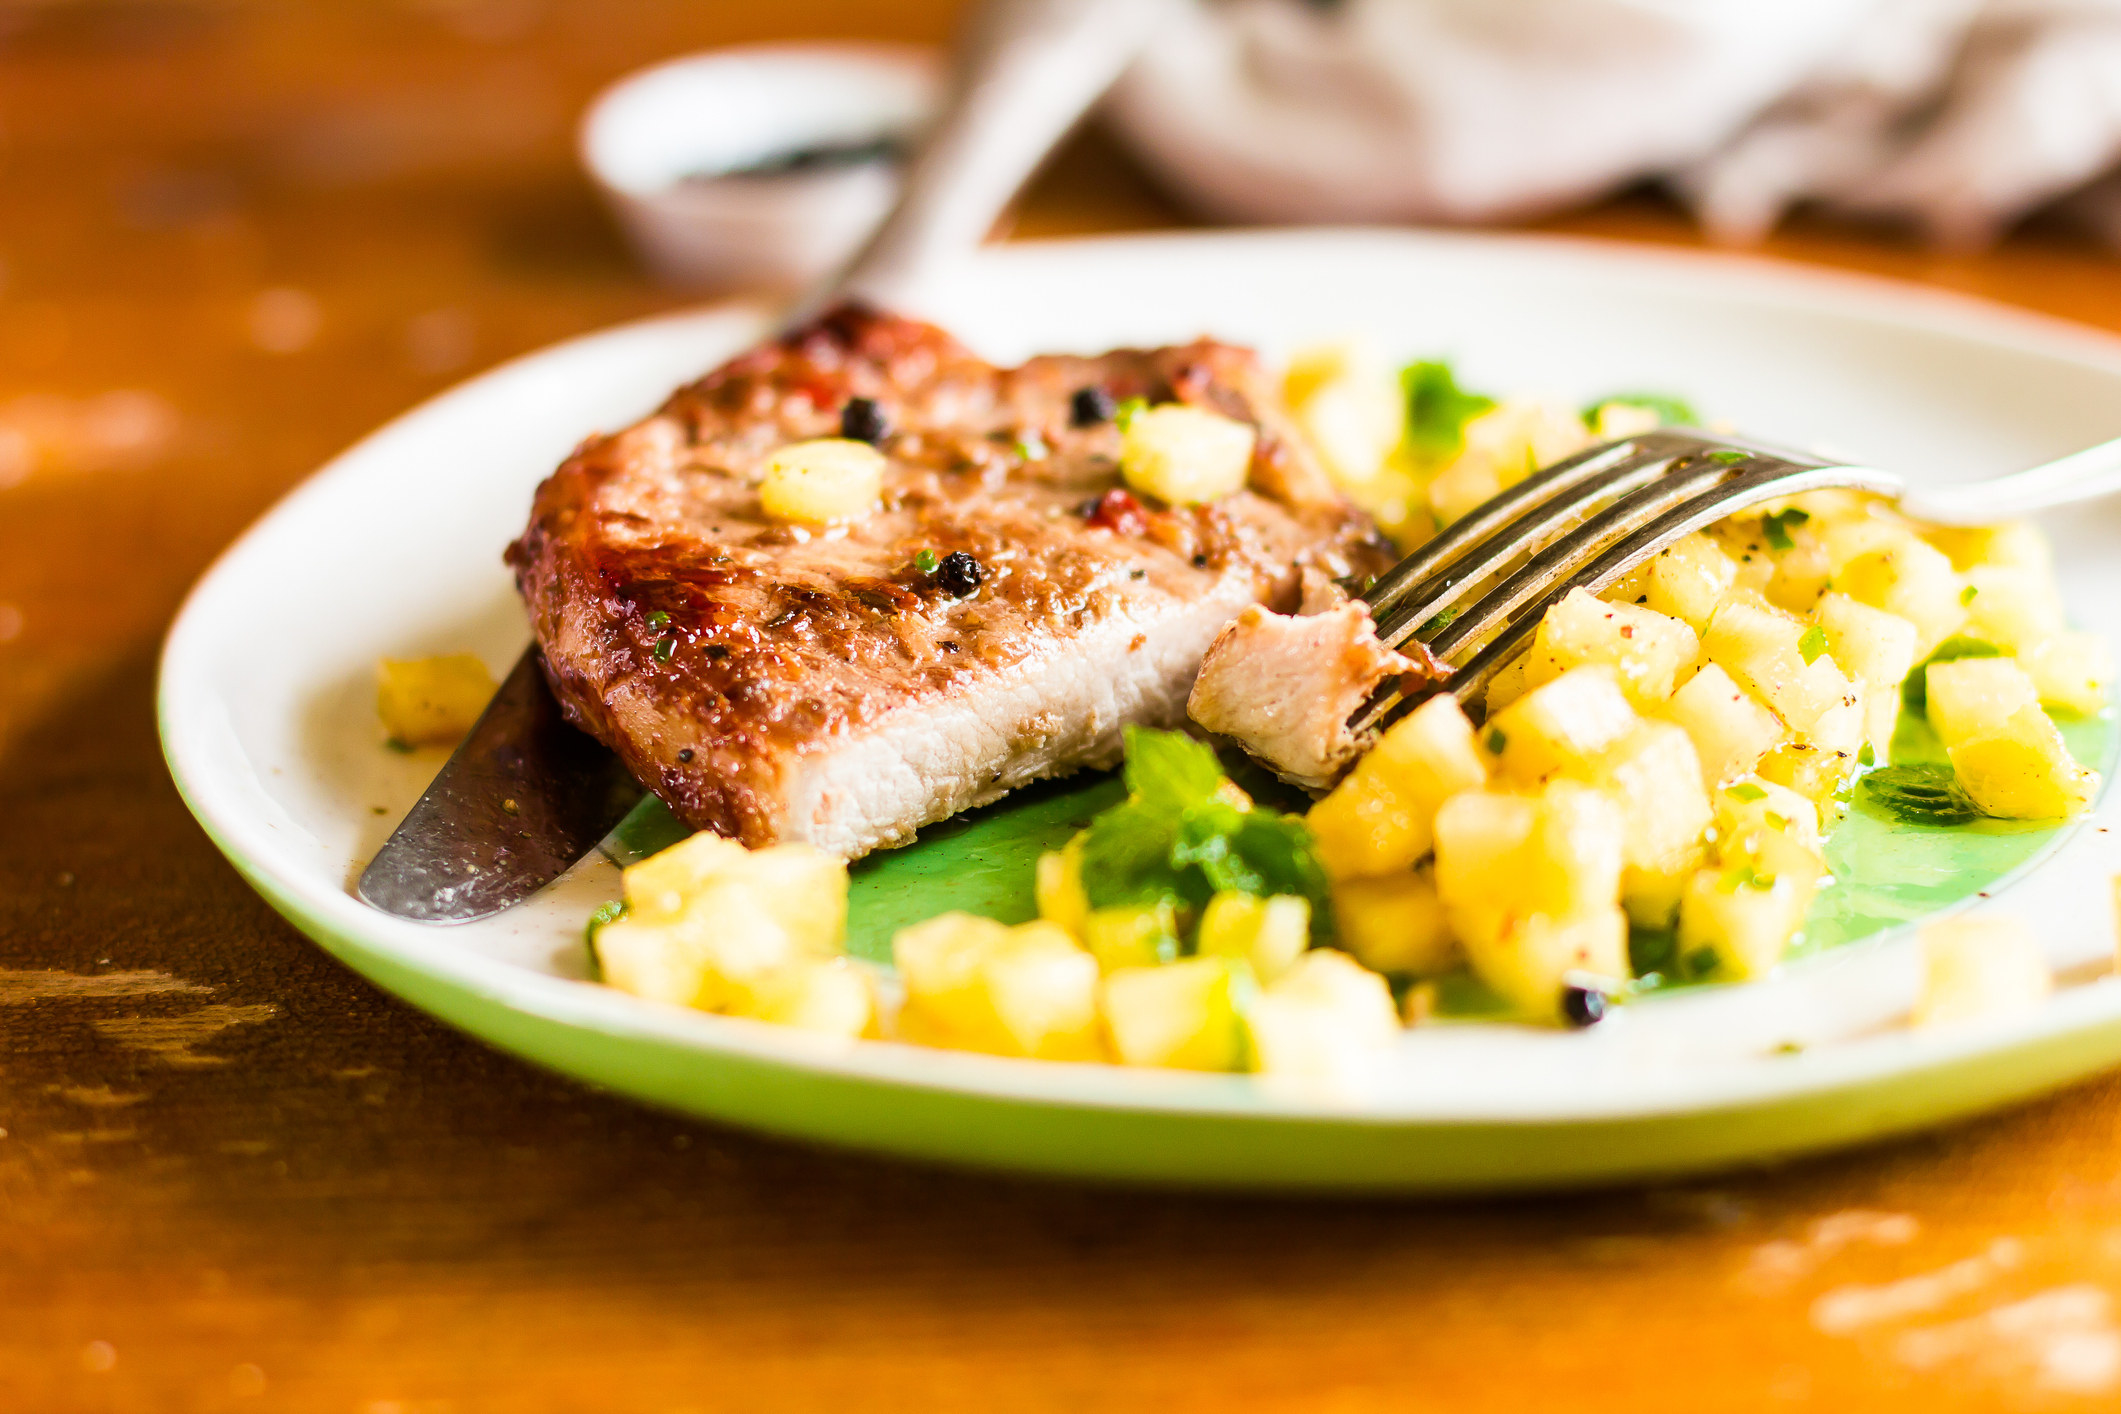 Slicing a pork chop with pineapple salsa and mint.